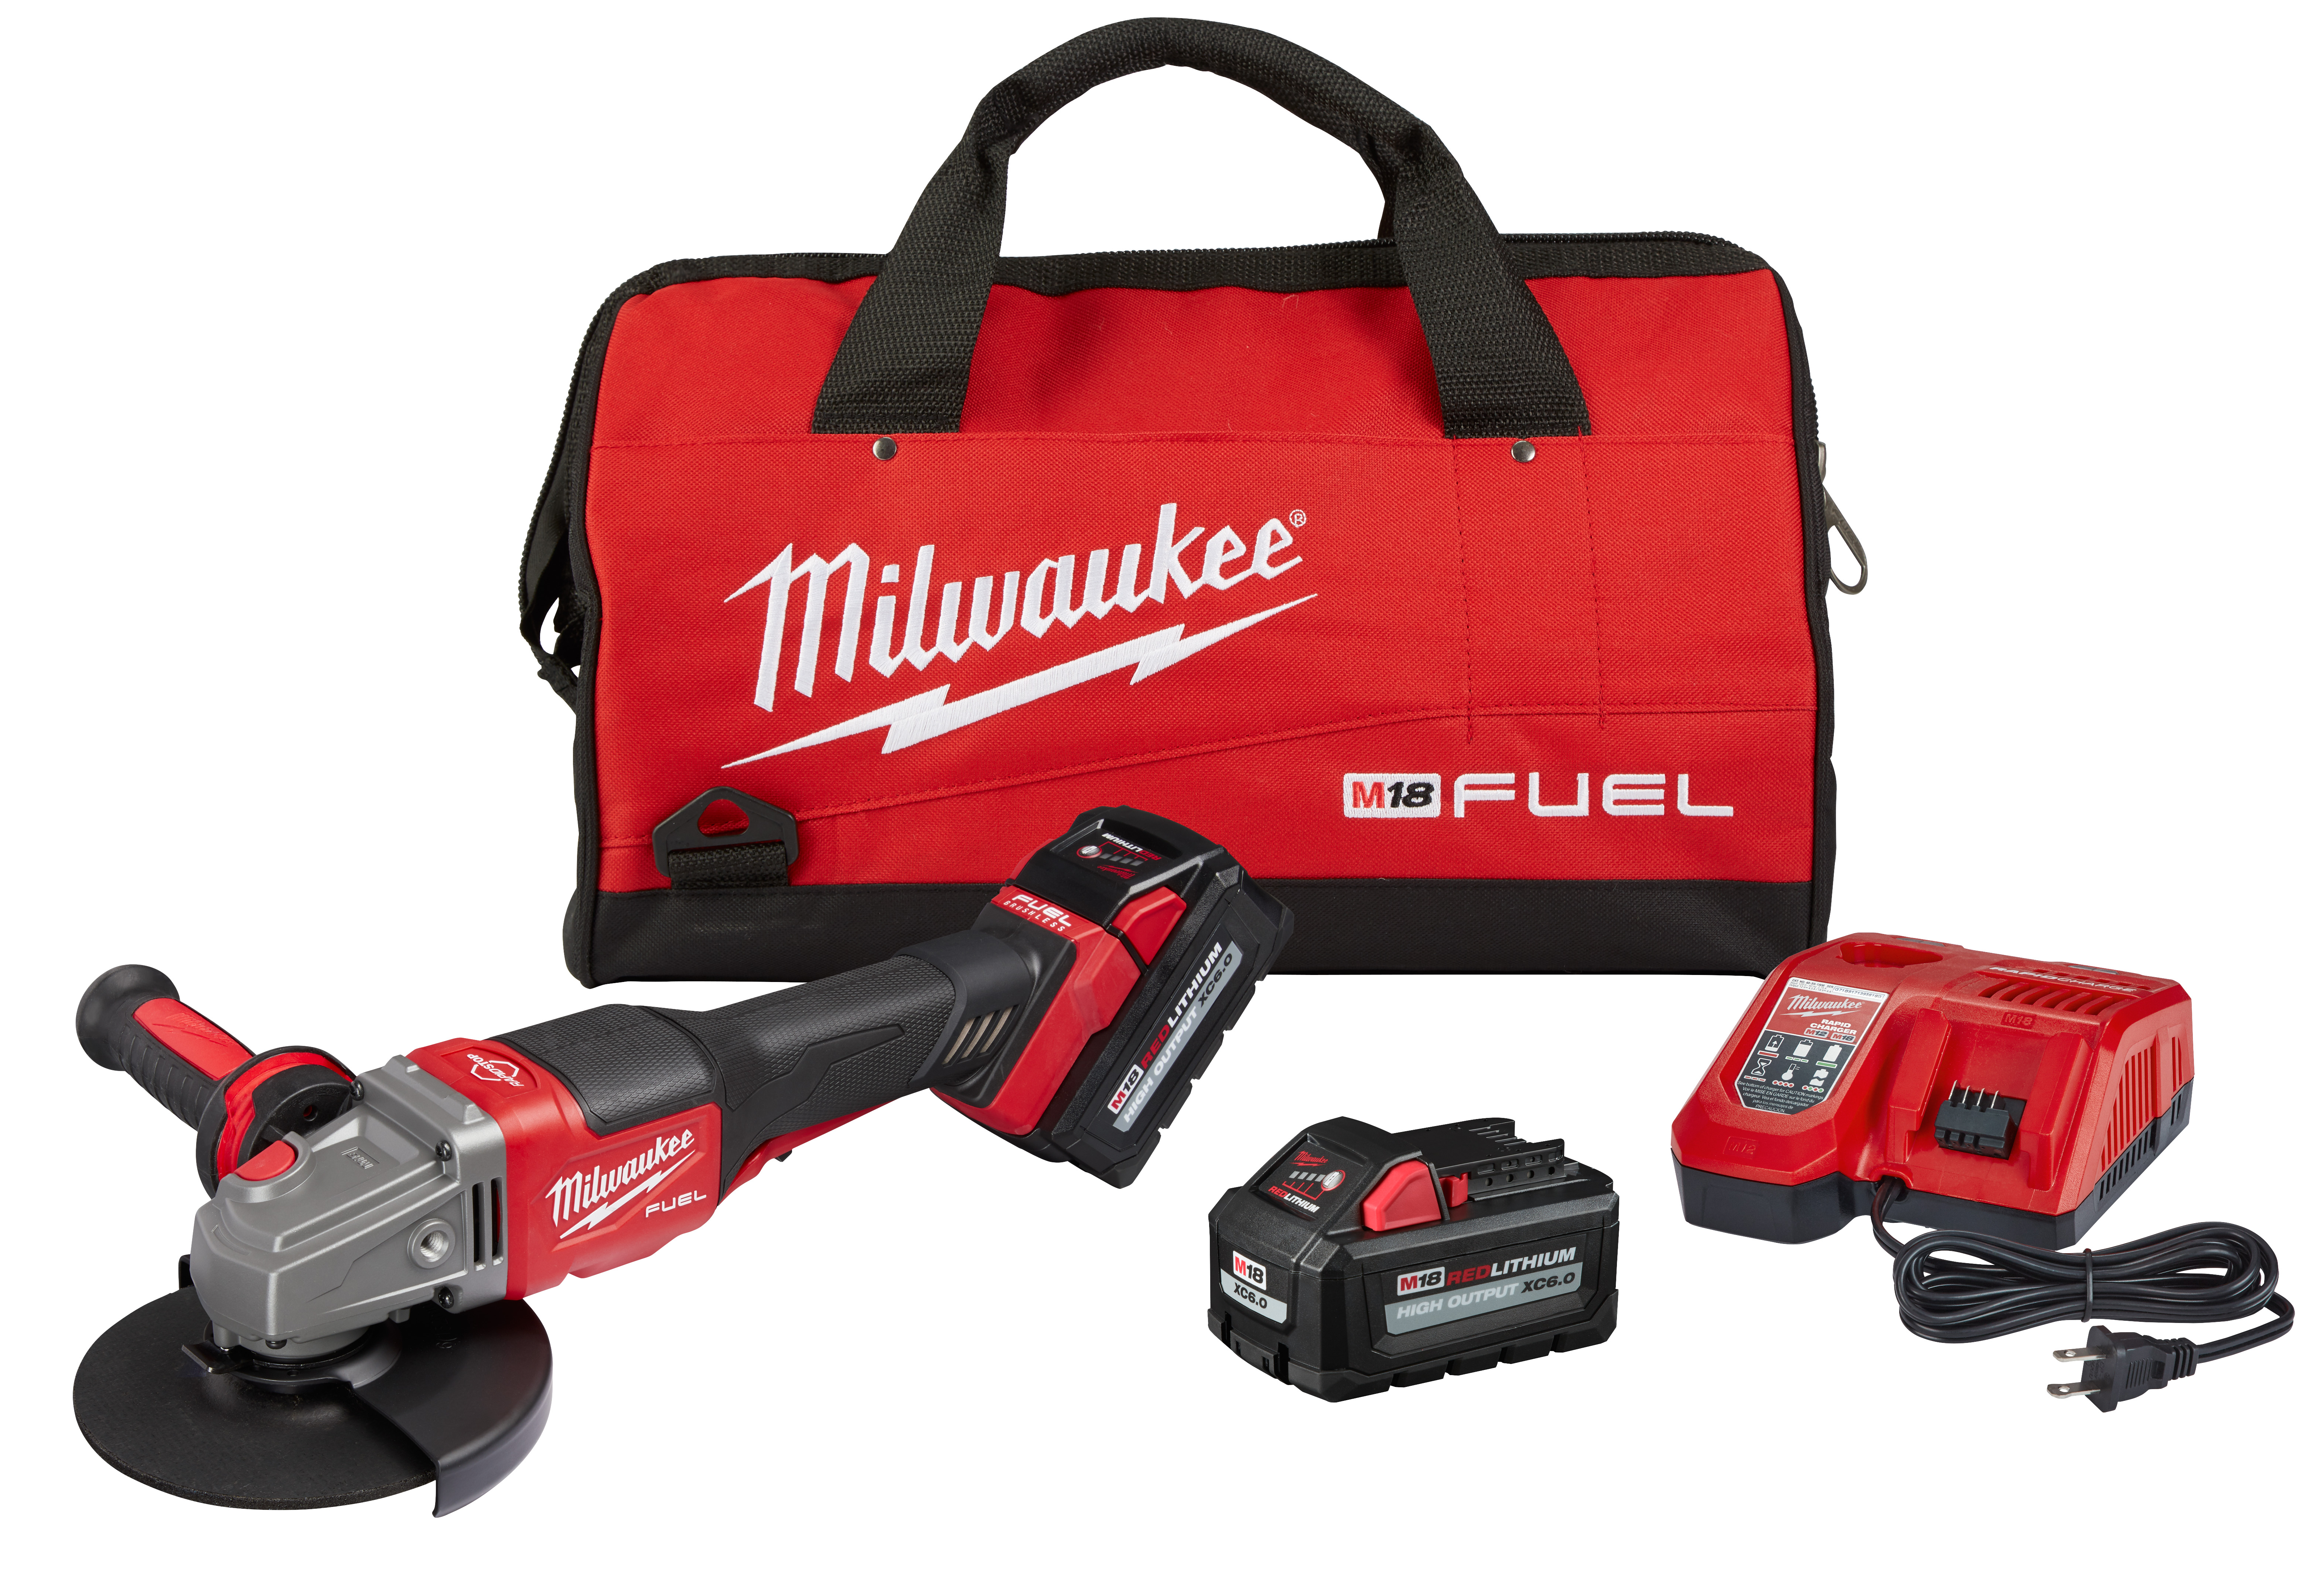 M18 FUEL 18 Volt Lithium-Ion Cordless 4-1/2 in.-6 in. No Lock Braking Grinder with Paddle Switch Kit